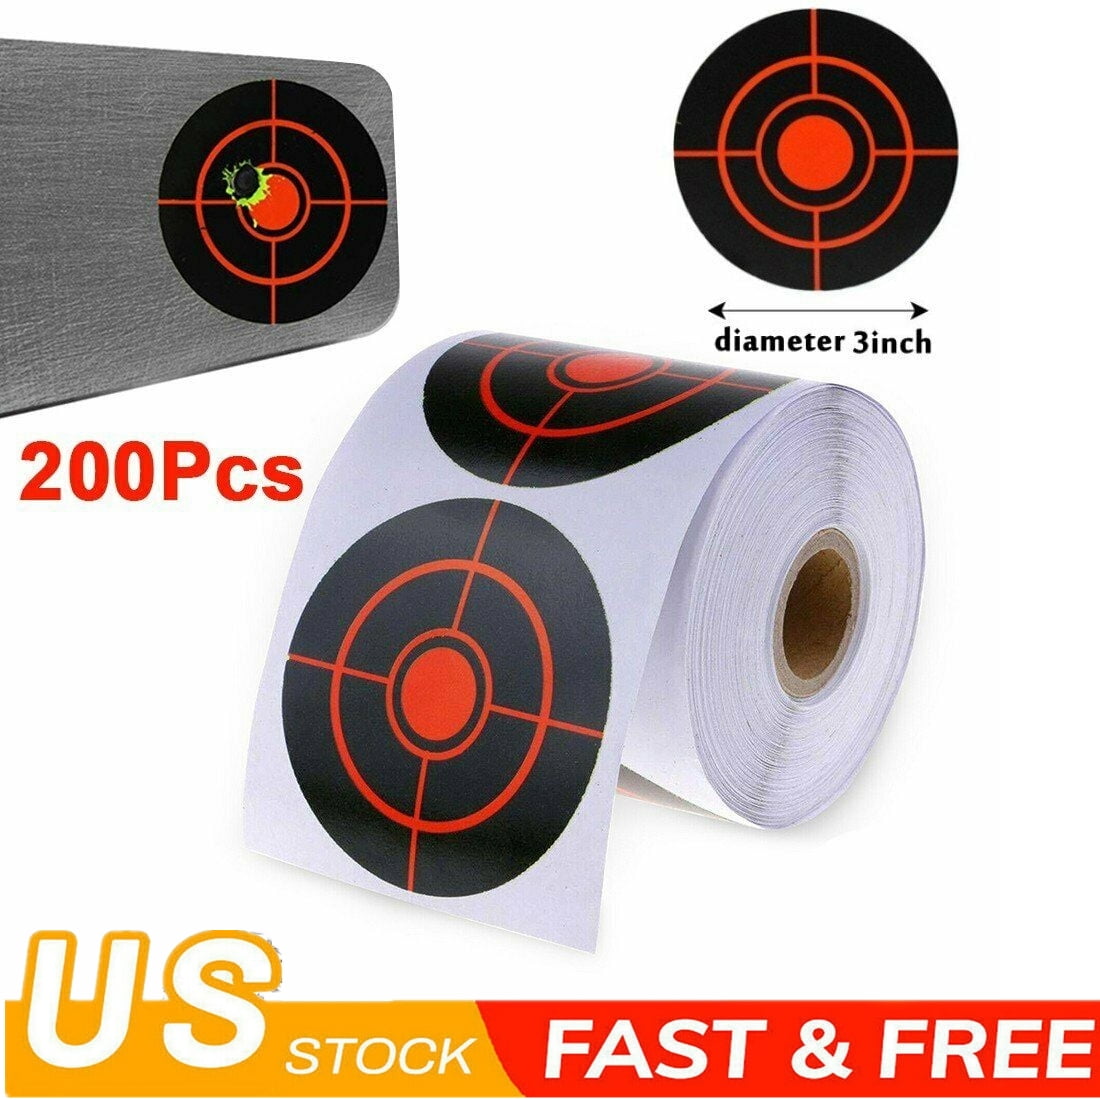 400Pcs 3" Shooting Target Stickers Splatter Reactive Targets for Archery Hunting